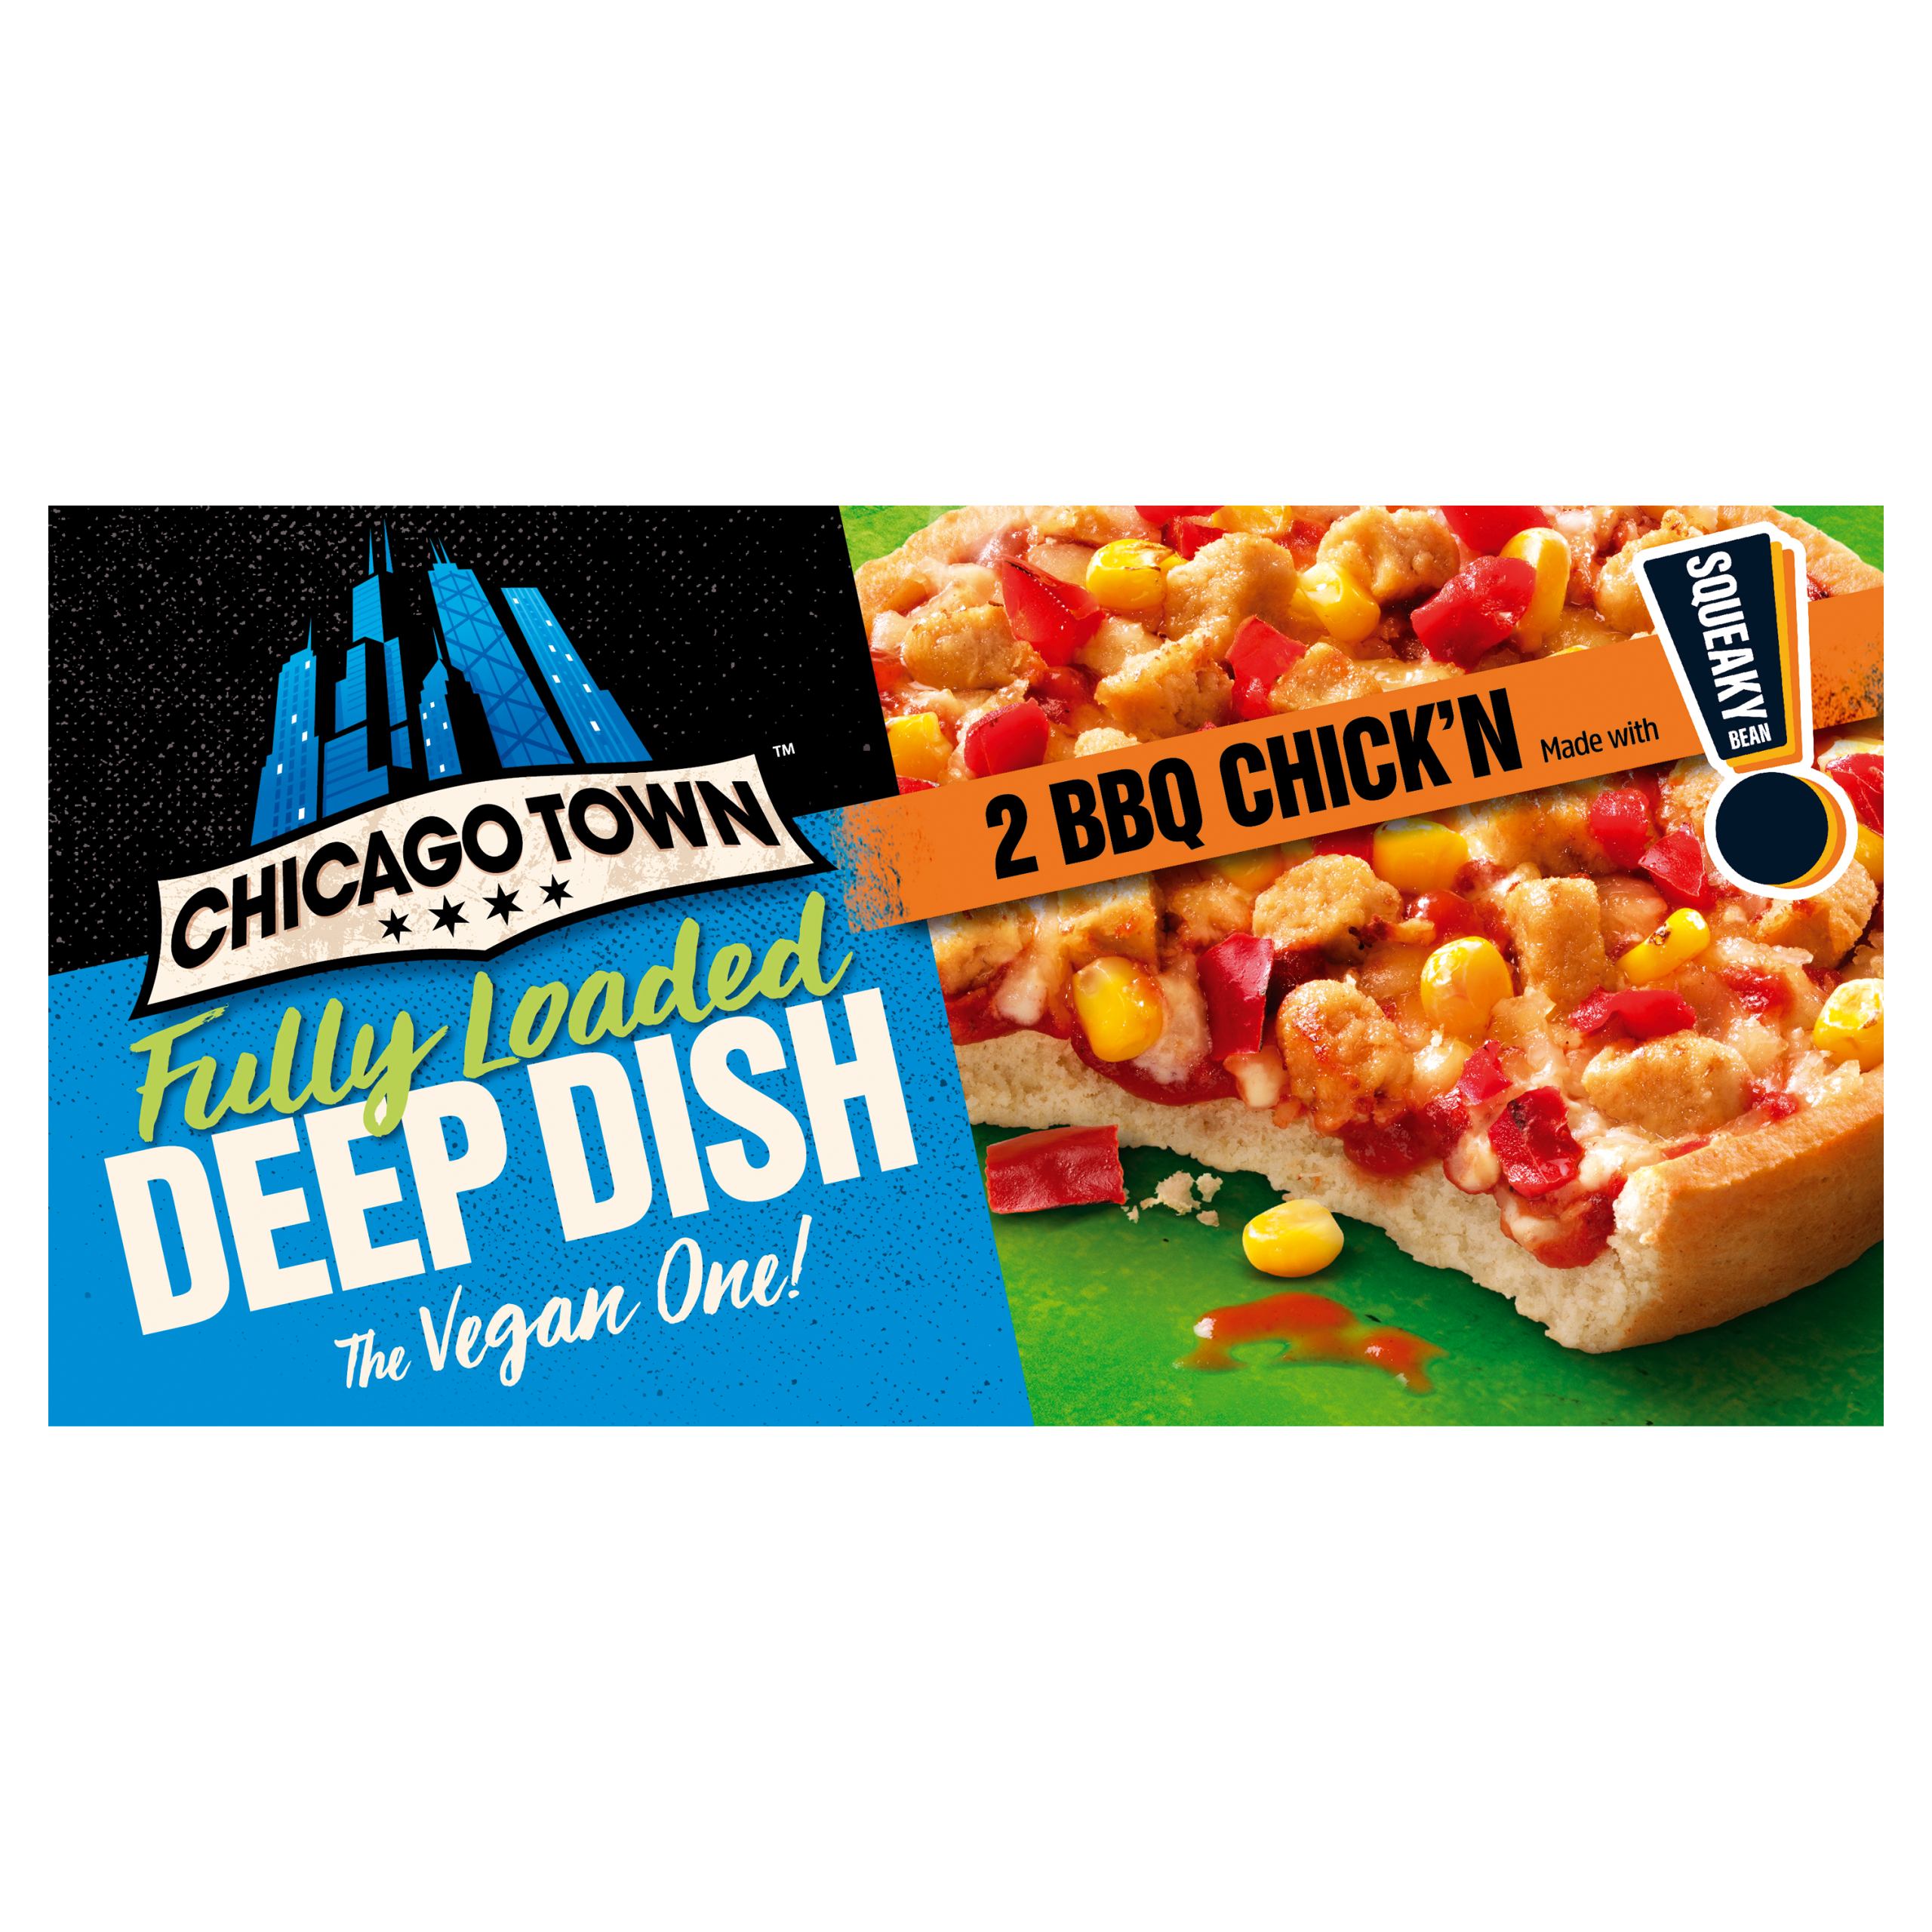 Chicago Town and Squeaky Bean launch new deep dish vegan BBQ Chick’n Pizza